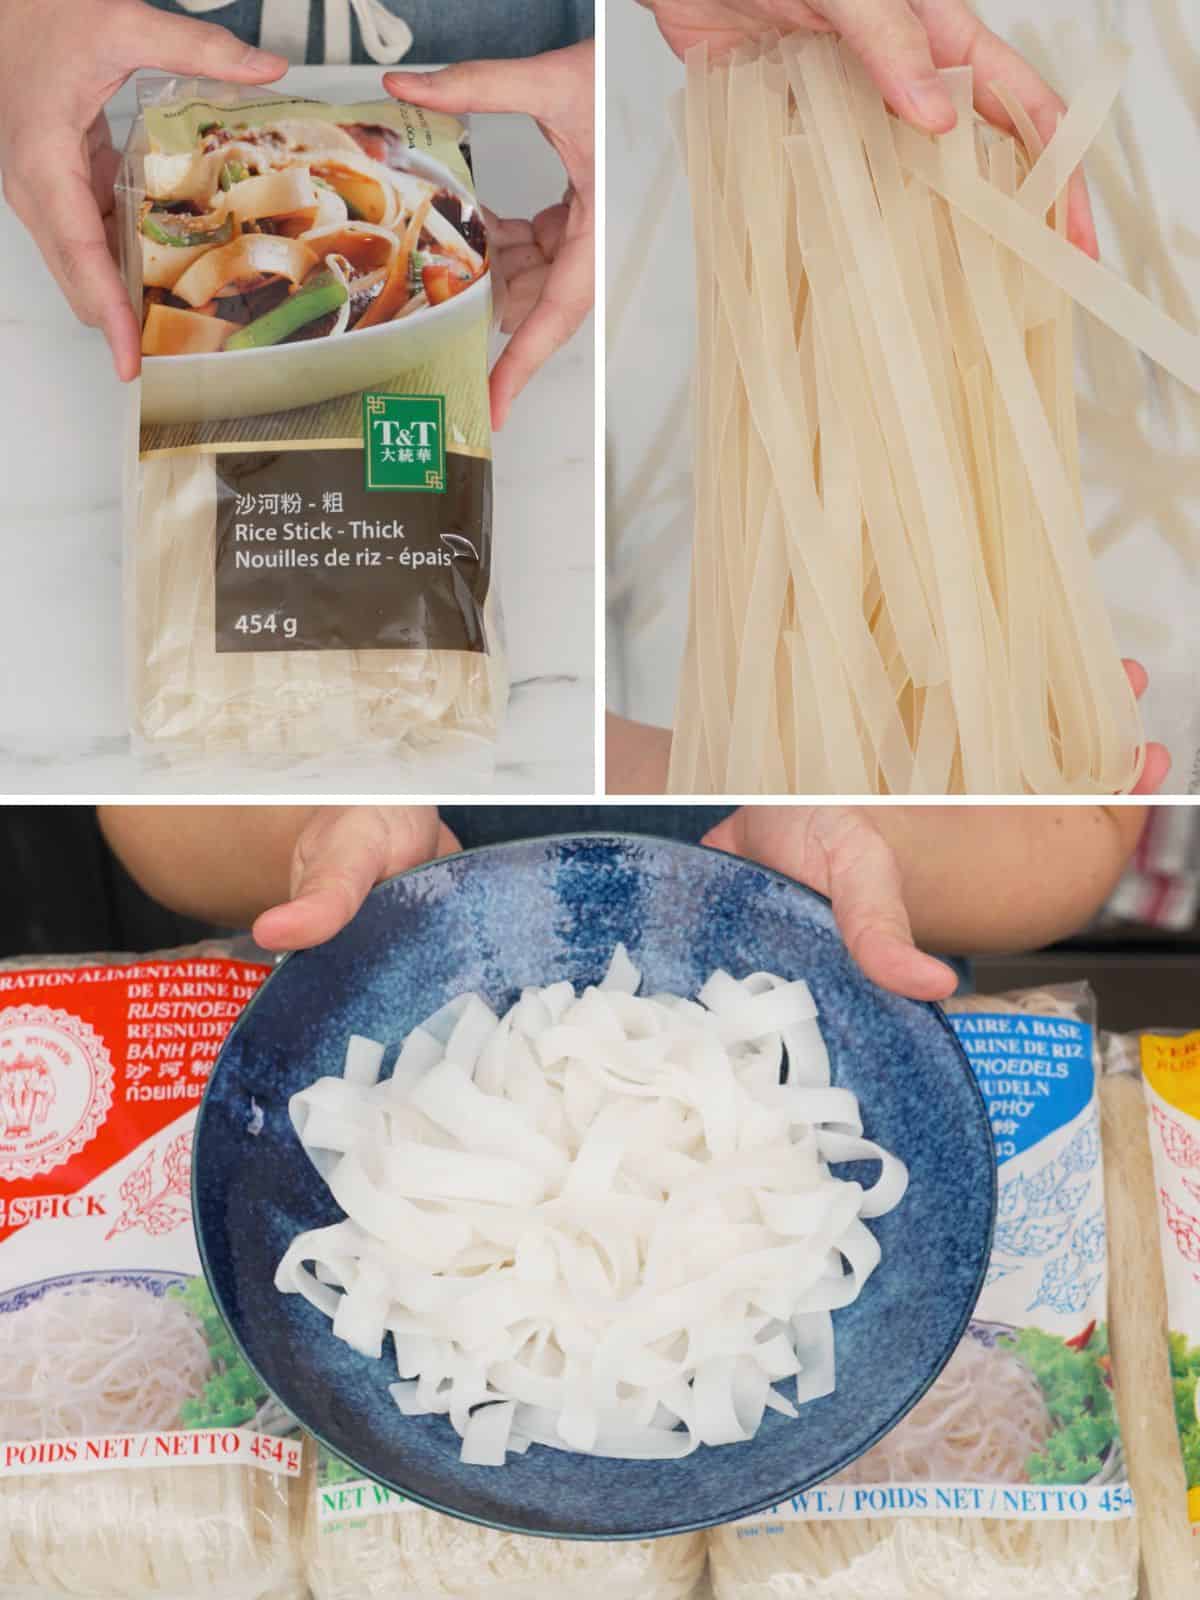 a gred of thick rice noodles in package, out of package, and fresh rice noodles